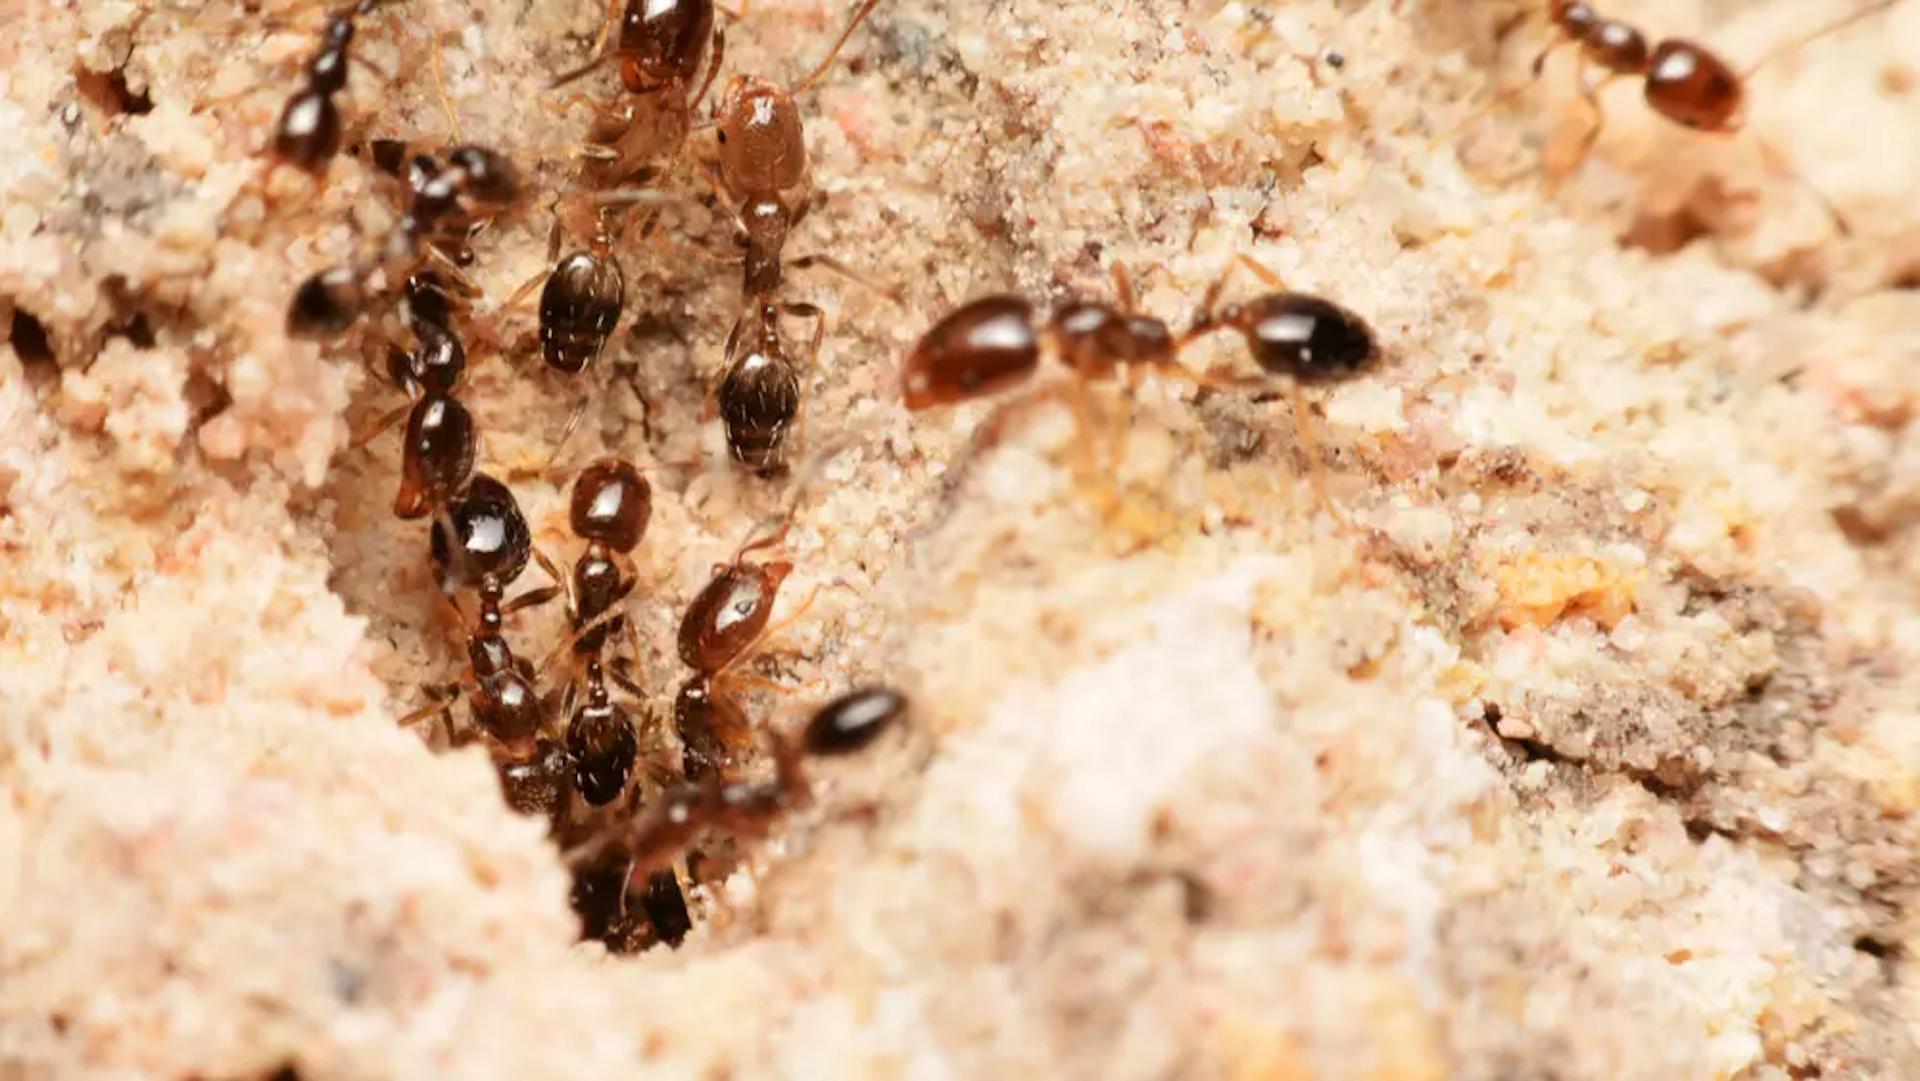 ants require a constant source of food to survive